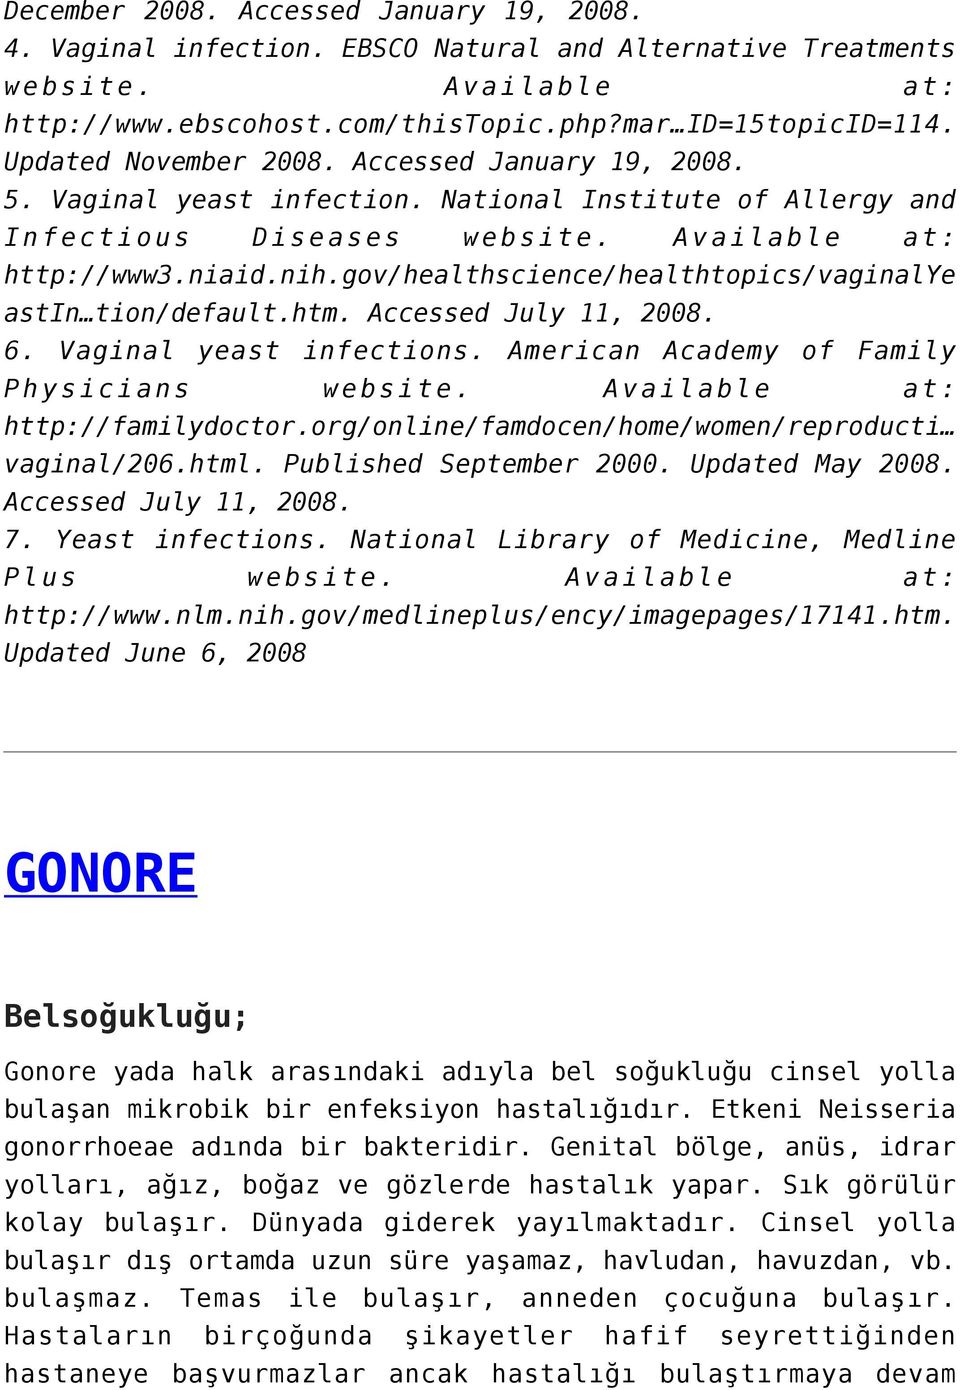 gov/healthscience/healthtopics/vaginalye astin tion/default.htm. Accessed July 11, 2008. 6. Vaginal yeast infections. American Academy of Family Physicians website. Available at: http://familydoctor.